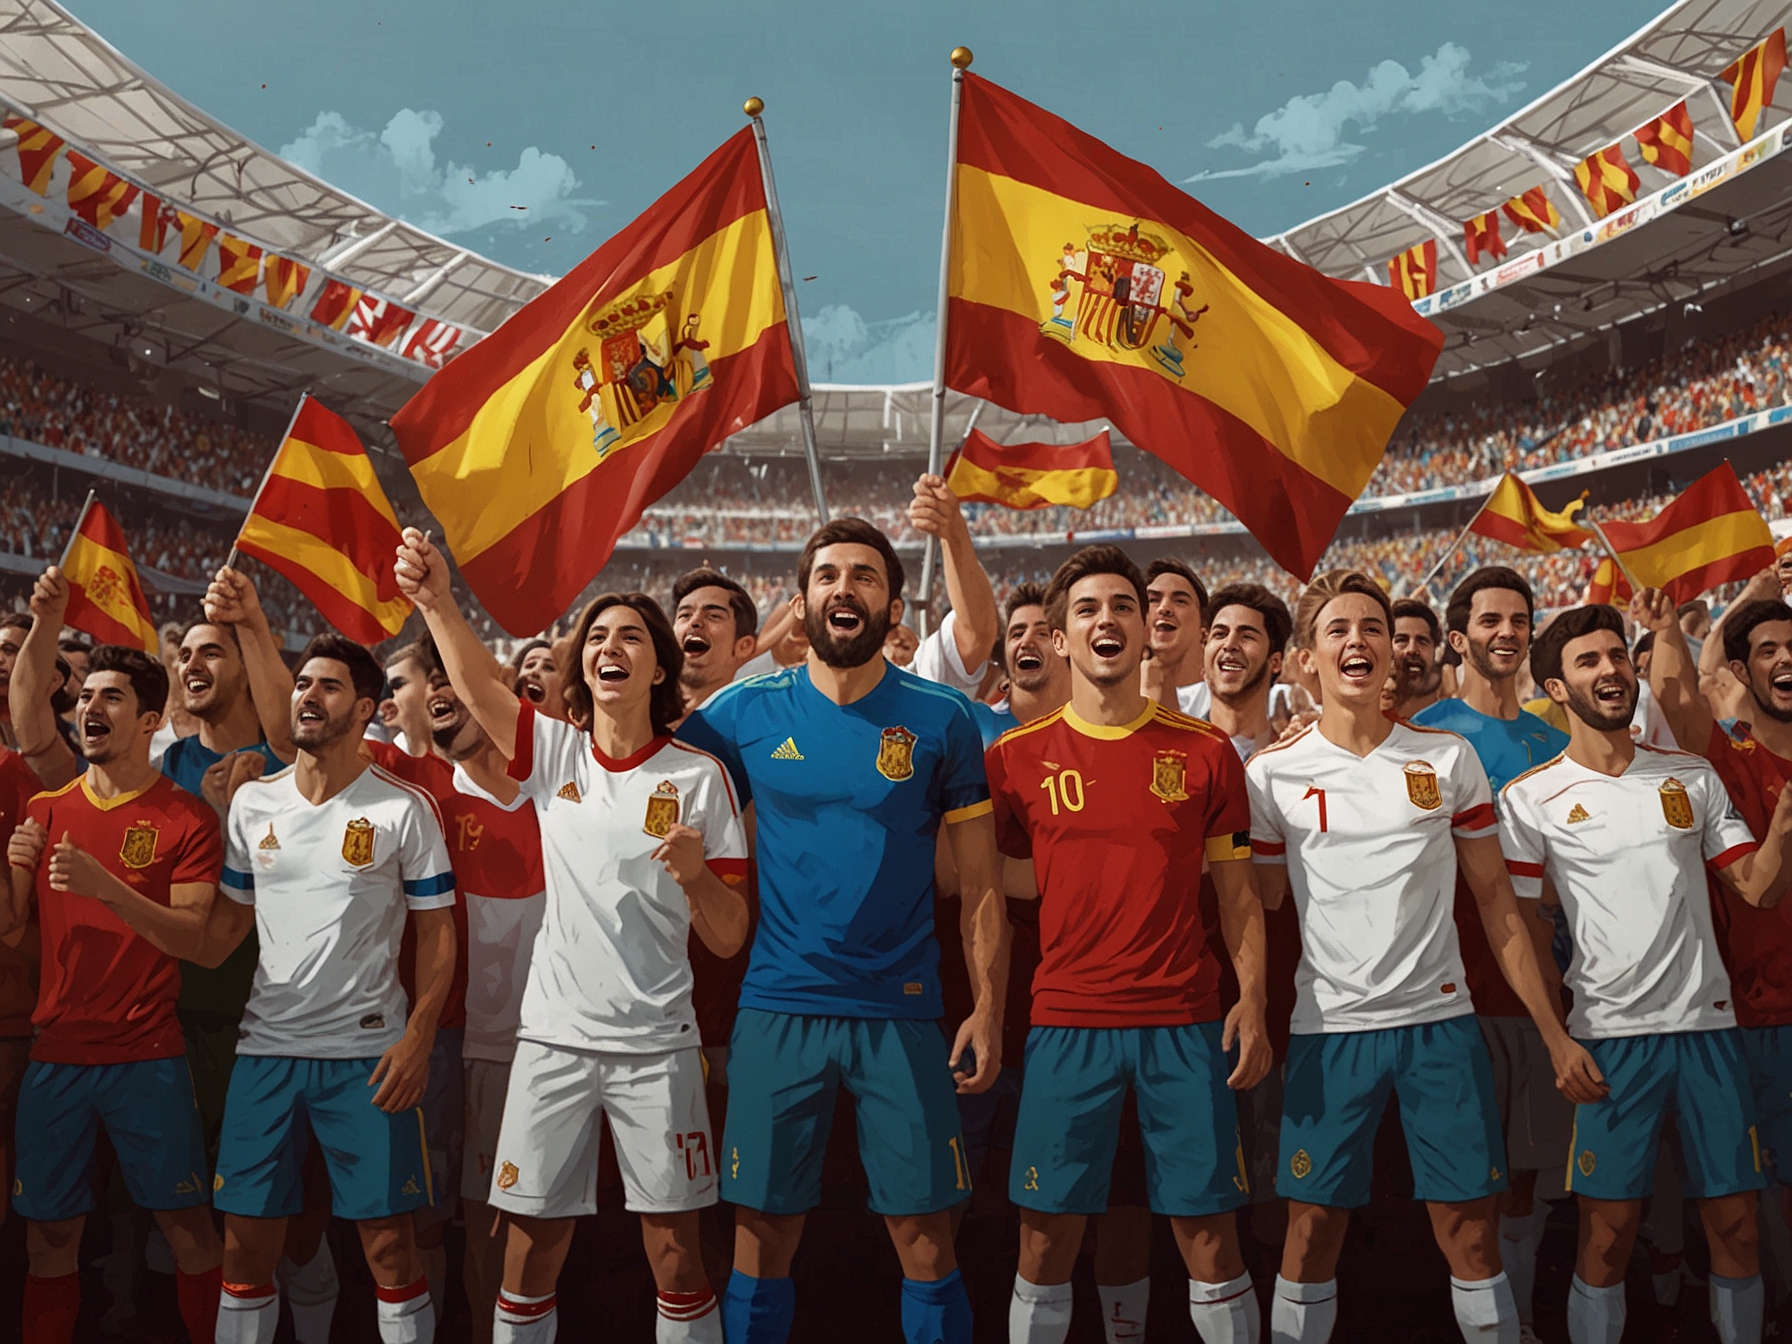 A pre-match scene at the stadium showing the vibrant, excited fans of both Spain and Italy holding national flags and banners, building up the anticipation for the crucial Group B match.